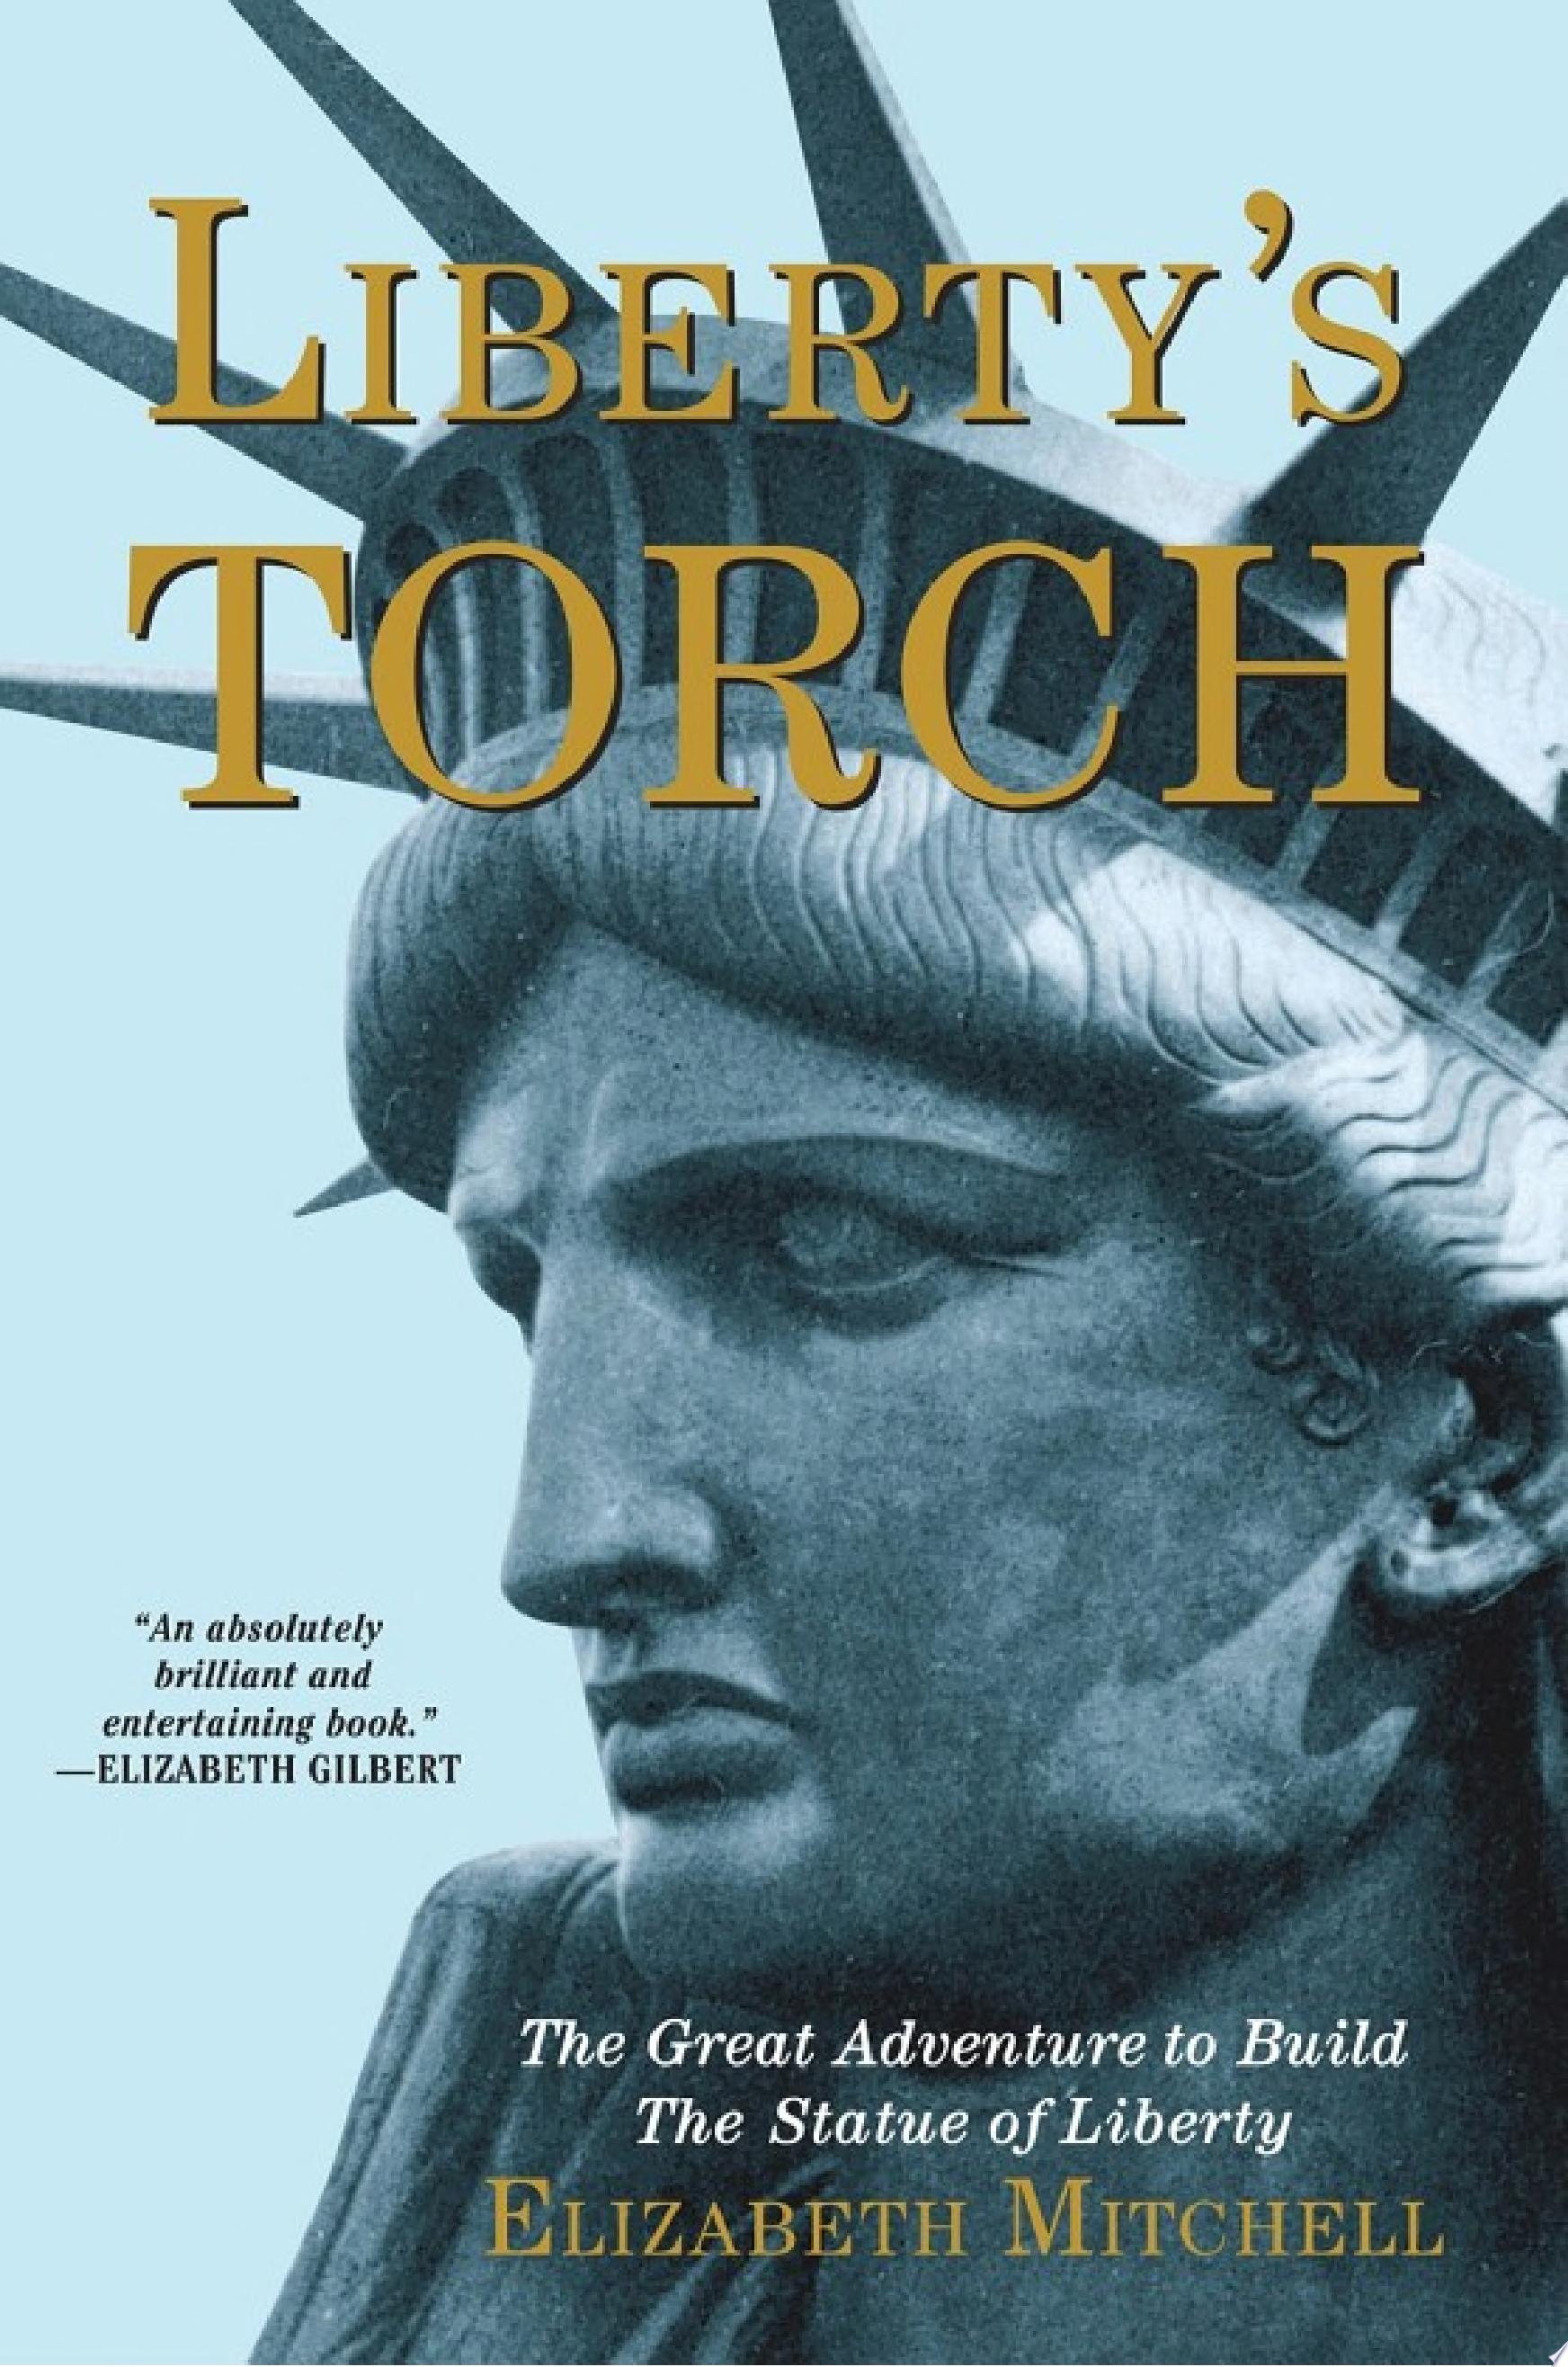 Image for "Liberty&#039;s Torch"